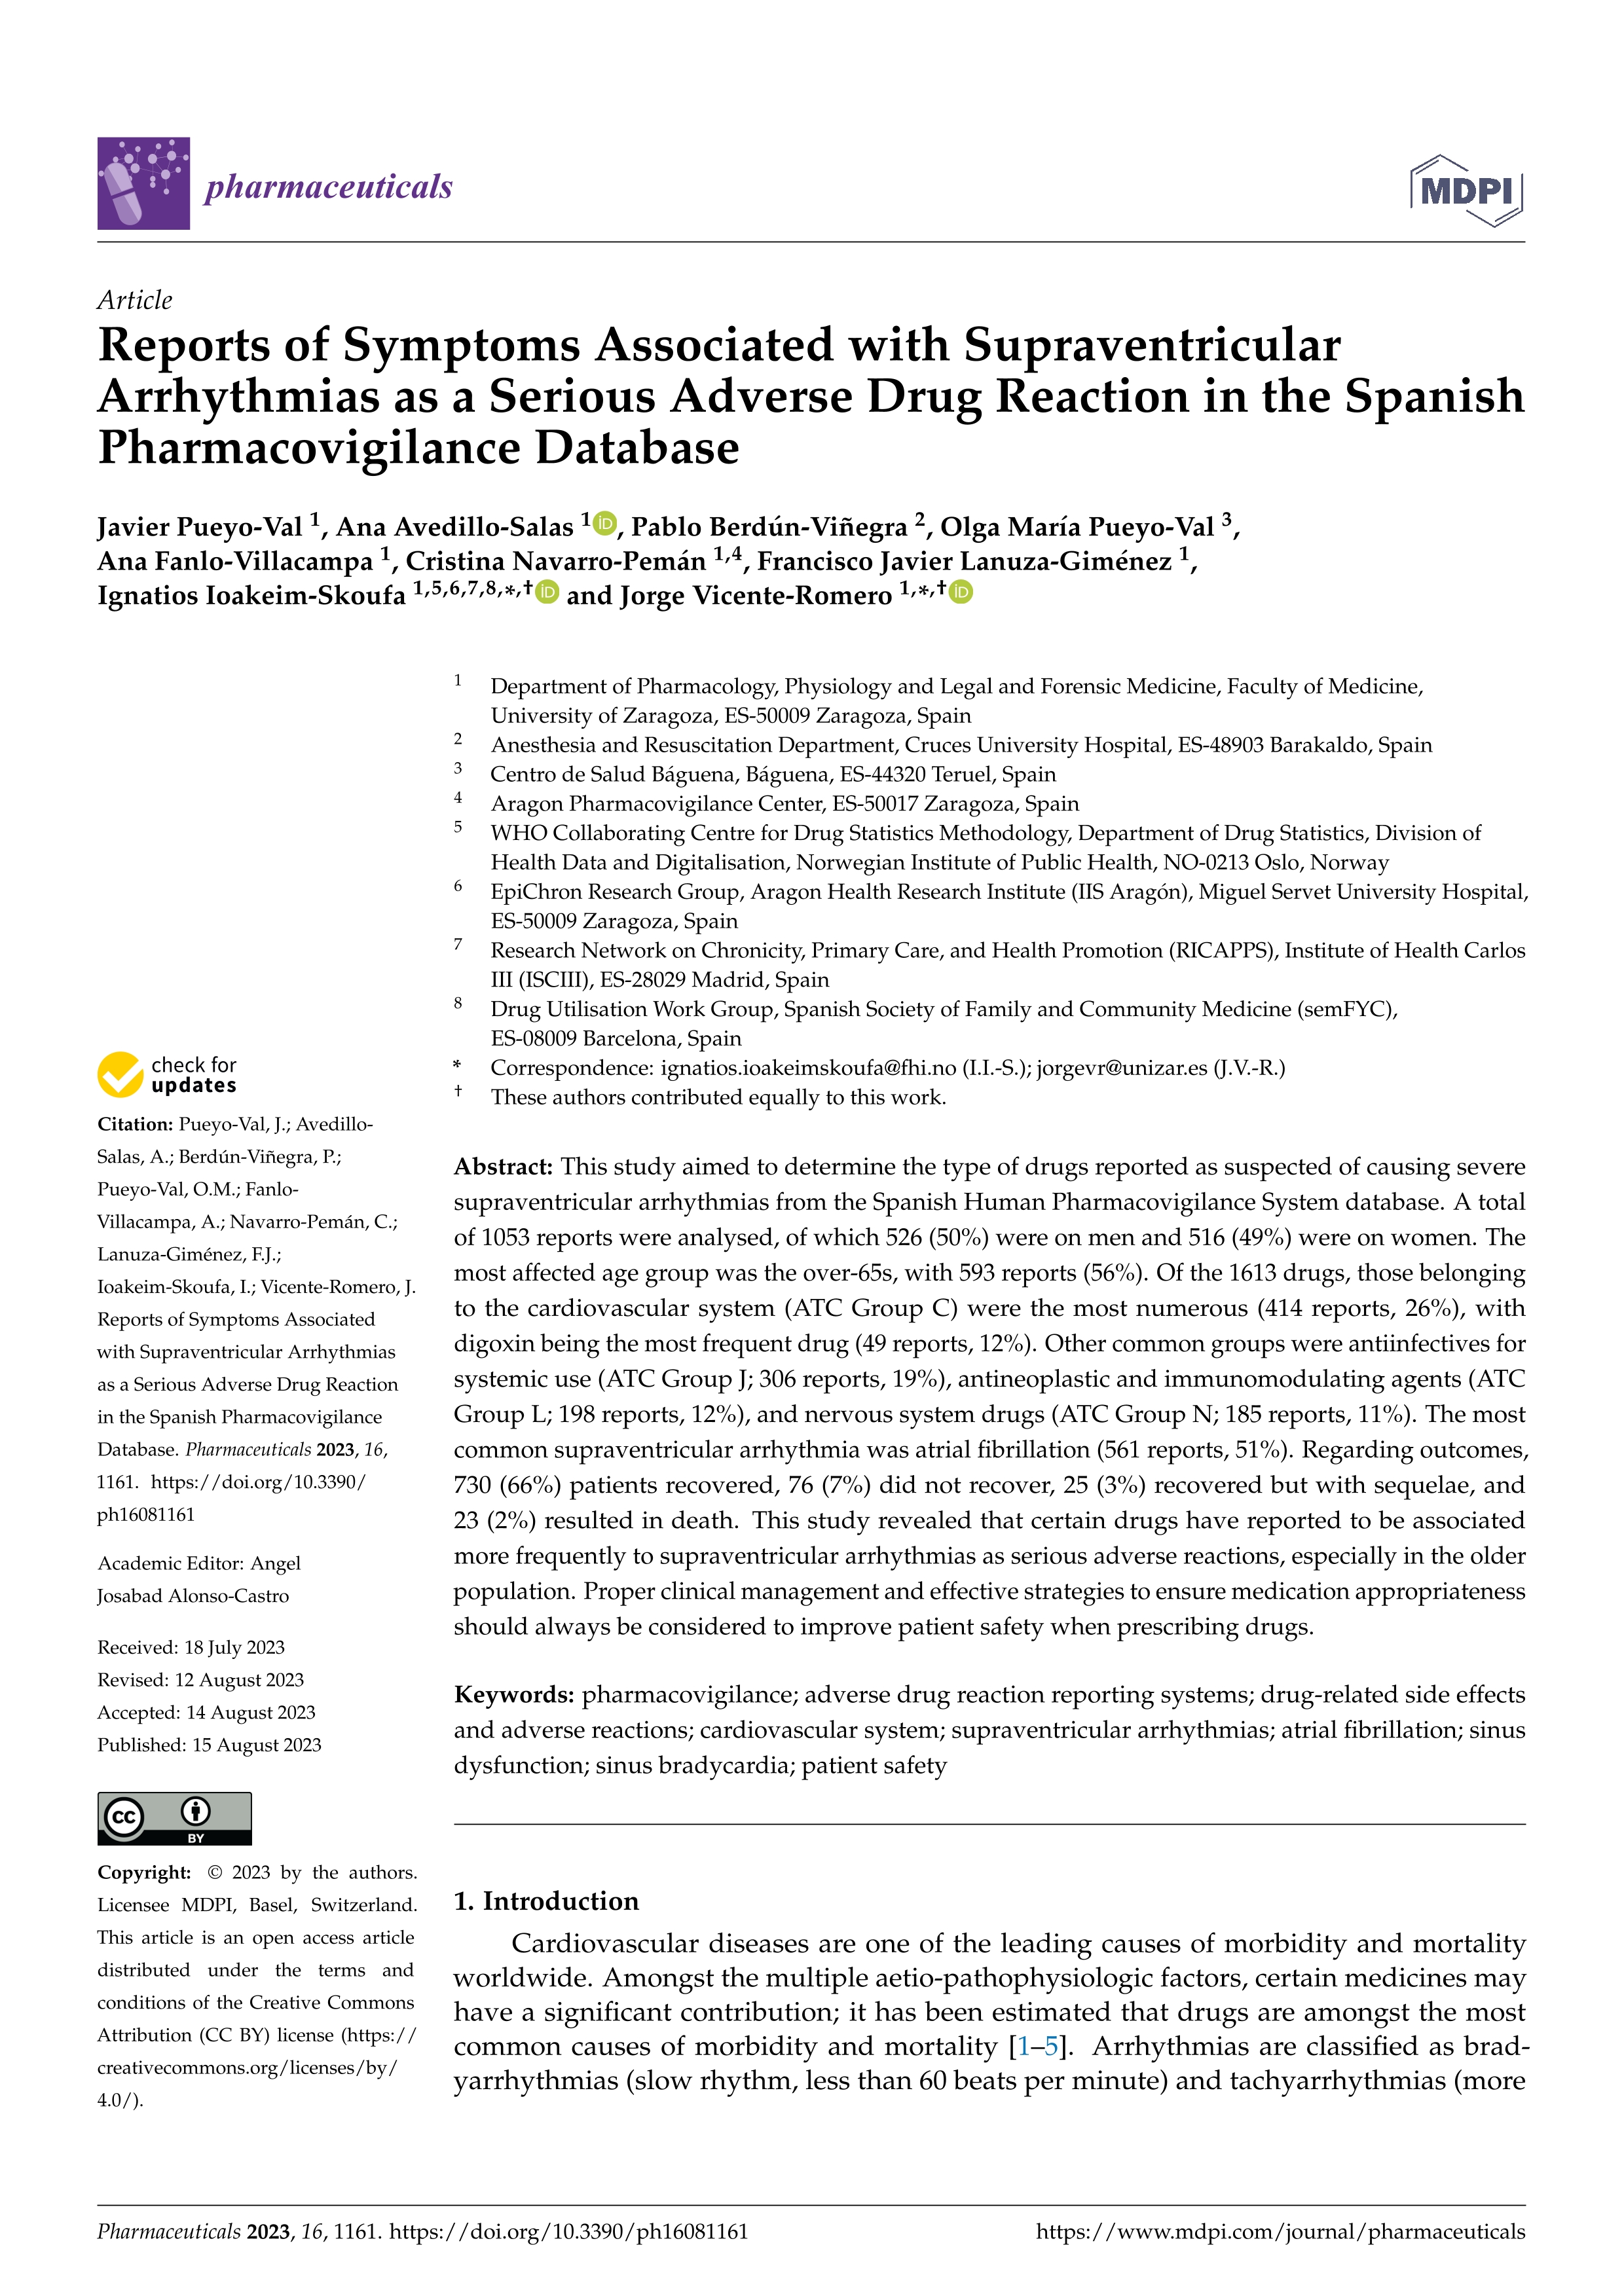 Reports of Symptoms Associated with Supraventricular Arrhythmias as a Serious Adverse Drug Reaction in the Spanish Pharmacovigilance Database